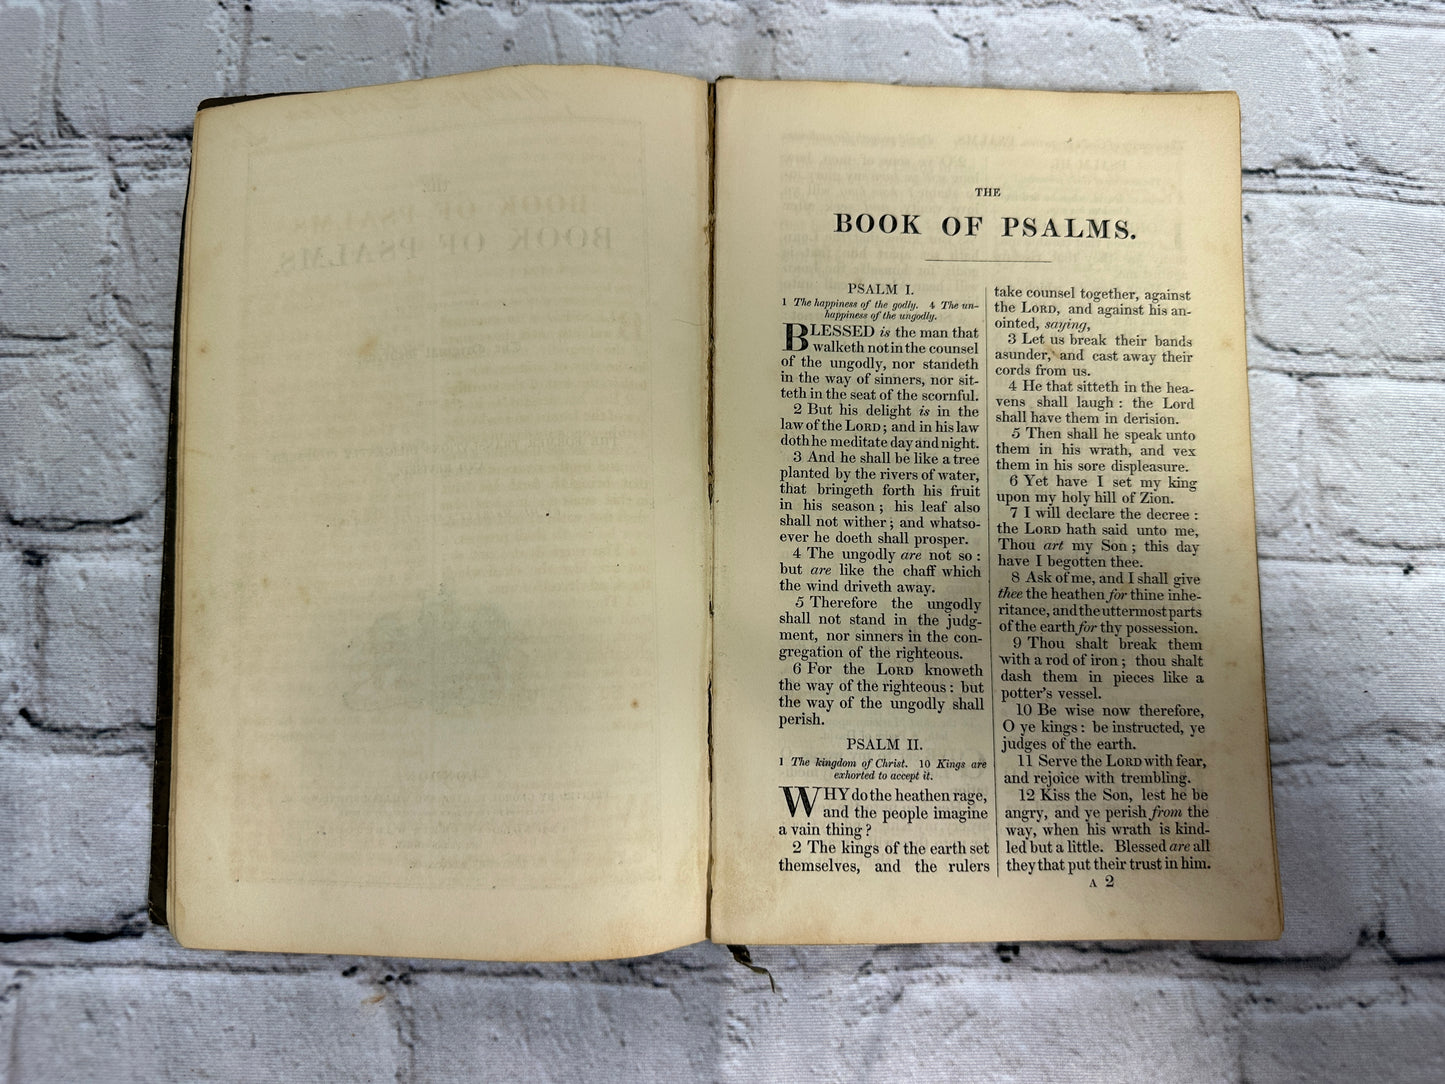 The Book of Psalms edited by His Majesty's Special Command [1849]